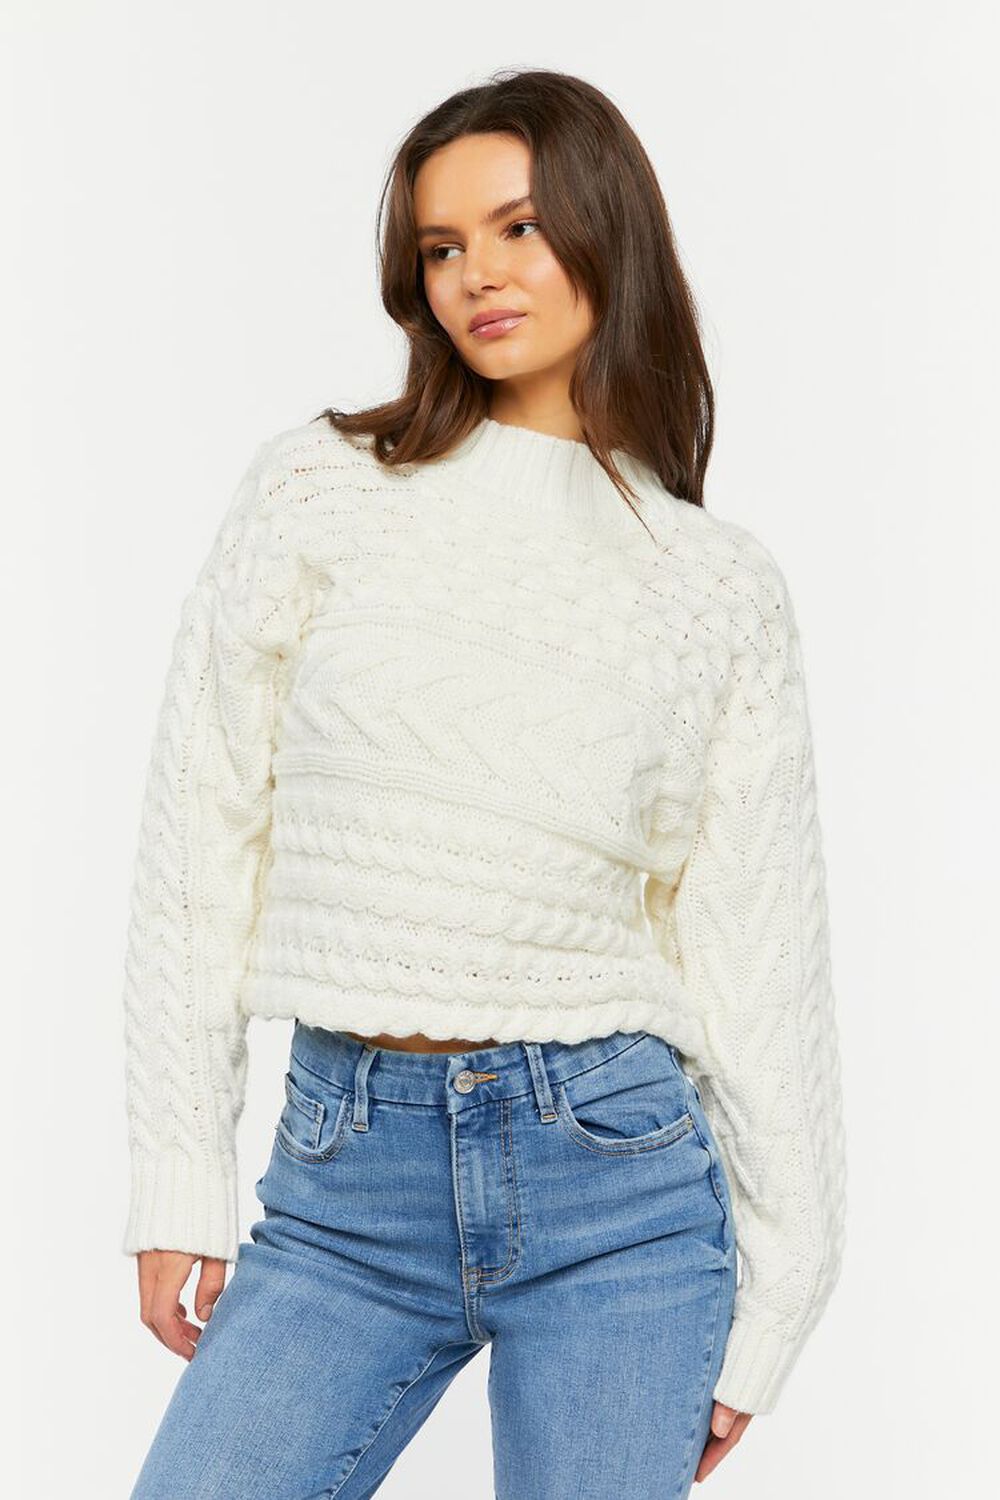 VANILLA Cable Knit Mock Neck Sweater, image 1